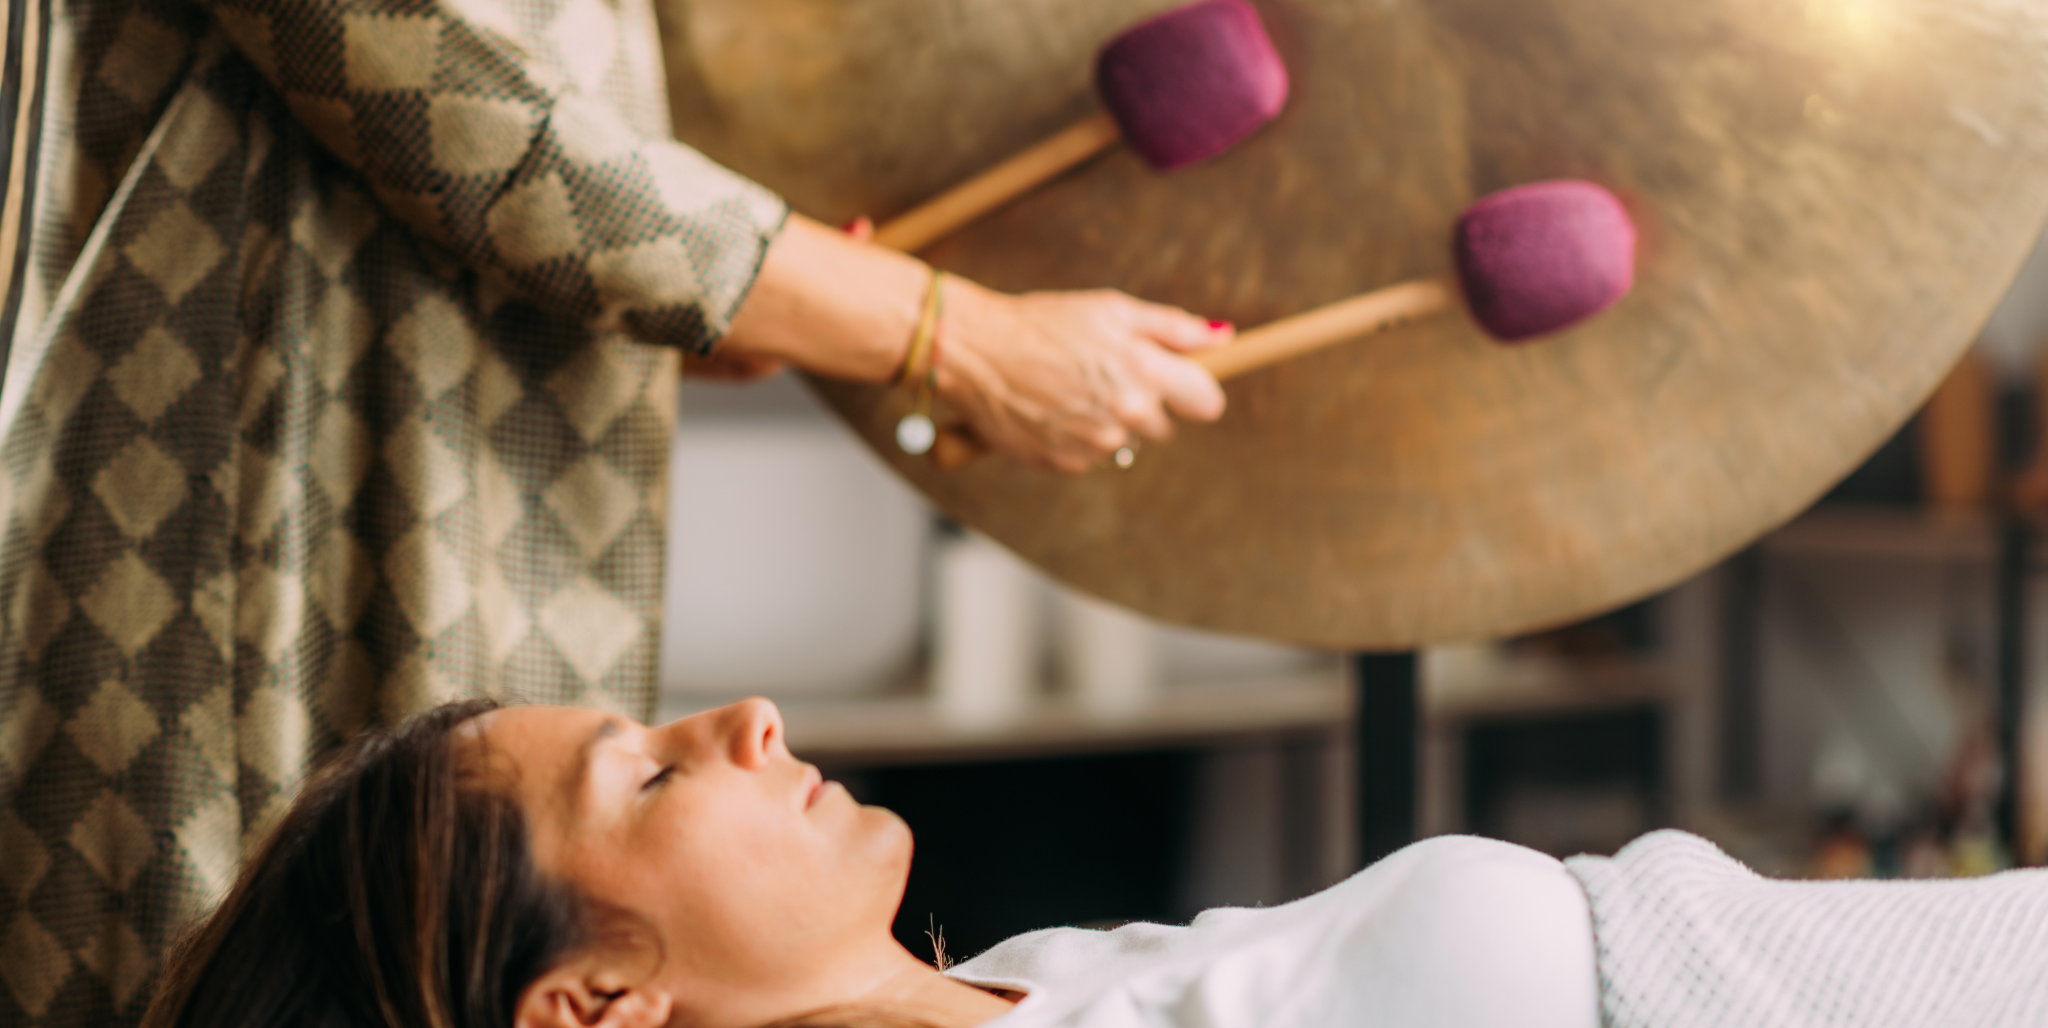 Gong bath: What it is, plus 4 health benefits to know about